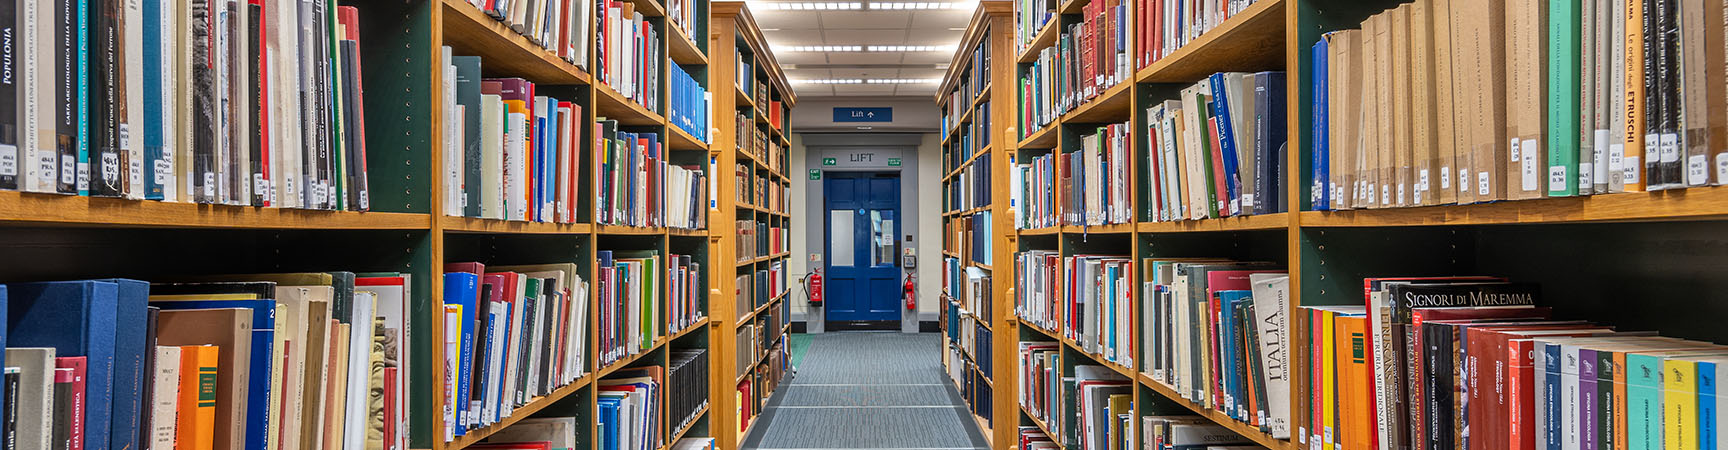 Two long rows of bookshelves either side of a corridor looking towards a blue door